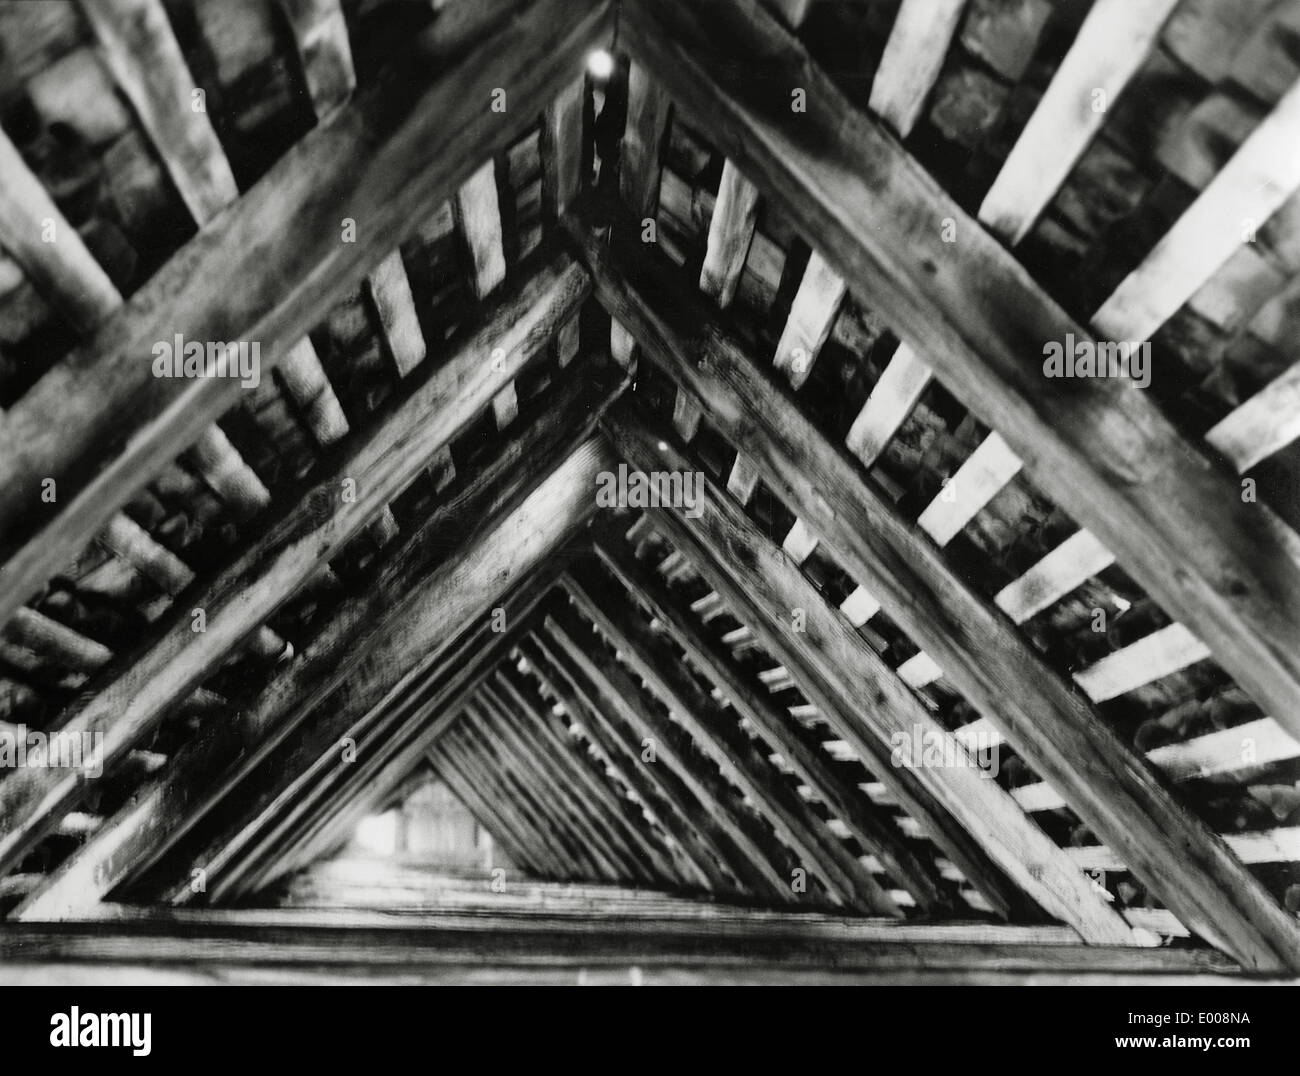 Timber roof truss Stock Photo